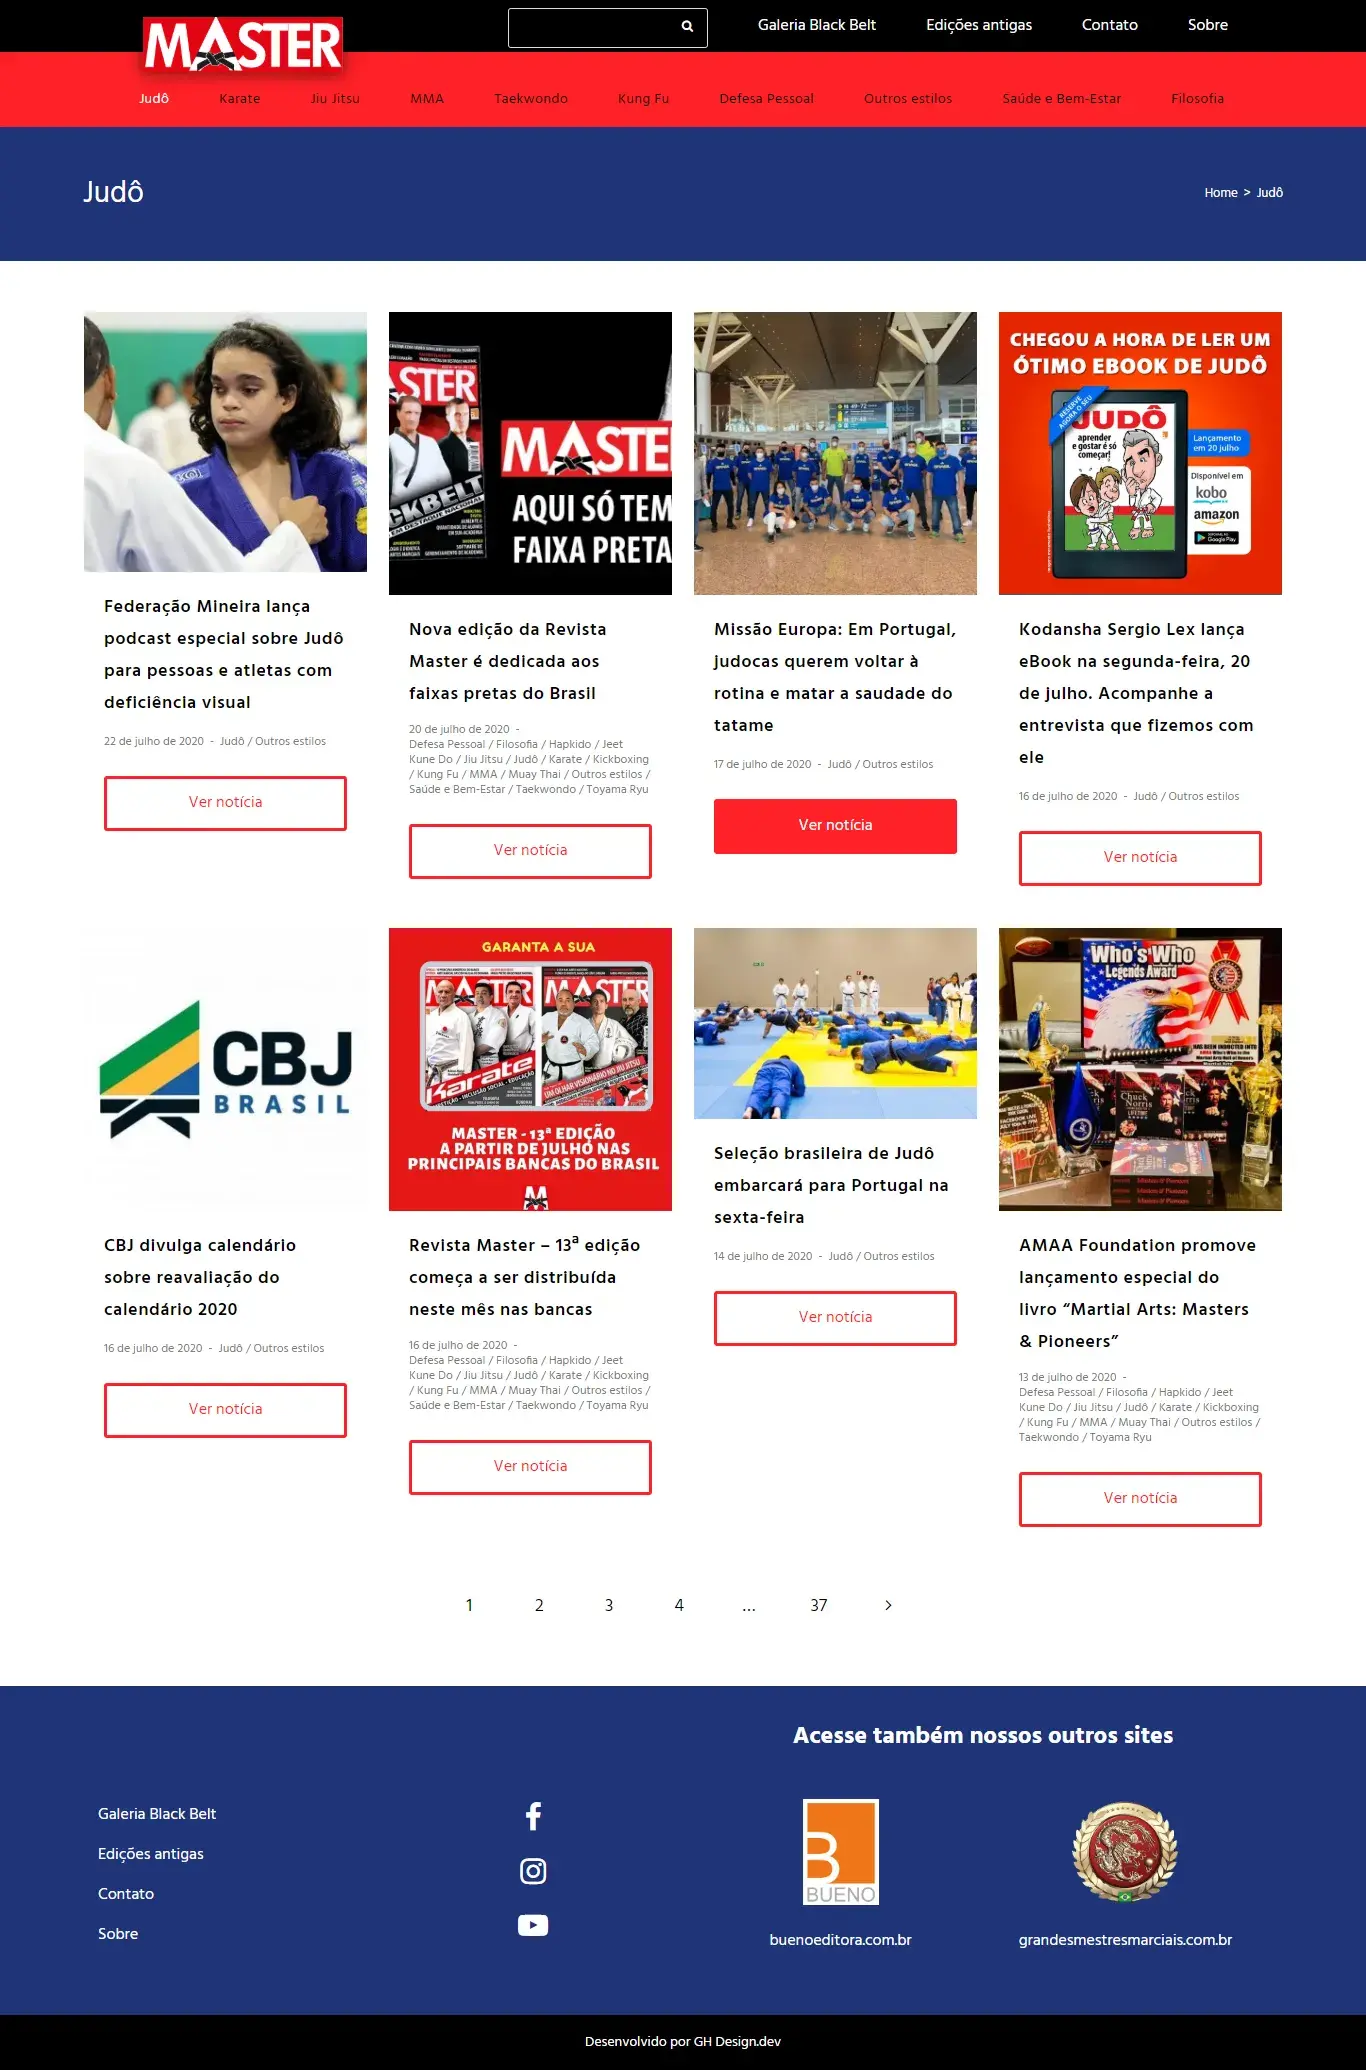 Image of the layout of the page of the Judo category by Post, on the Master Magazine website.